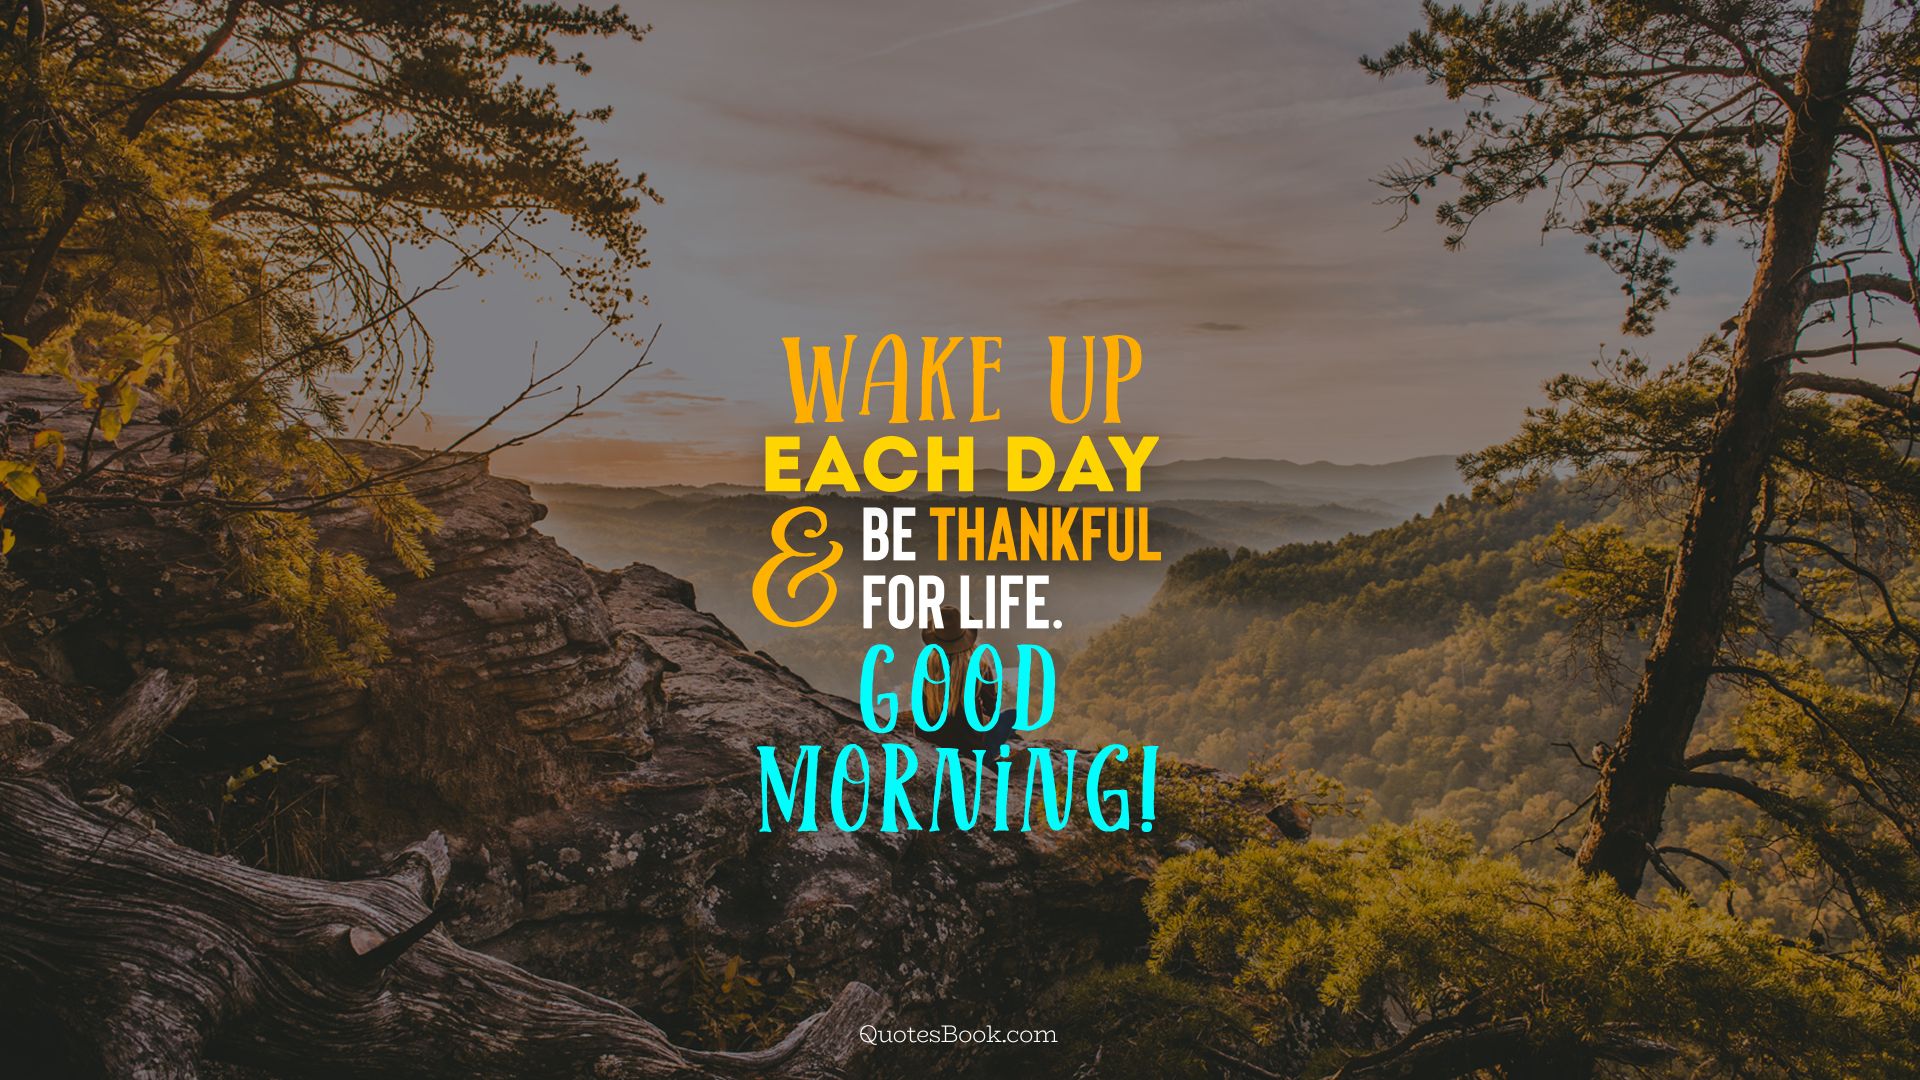 Wake up each day and be thankful for life. Good morning!